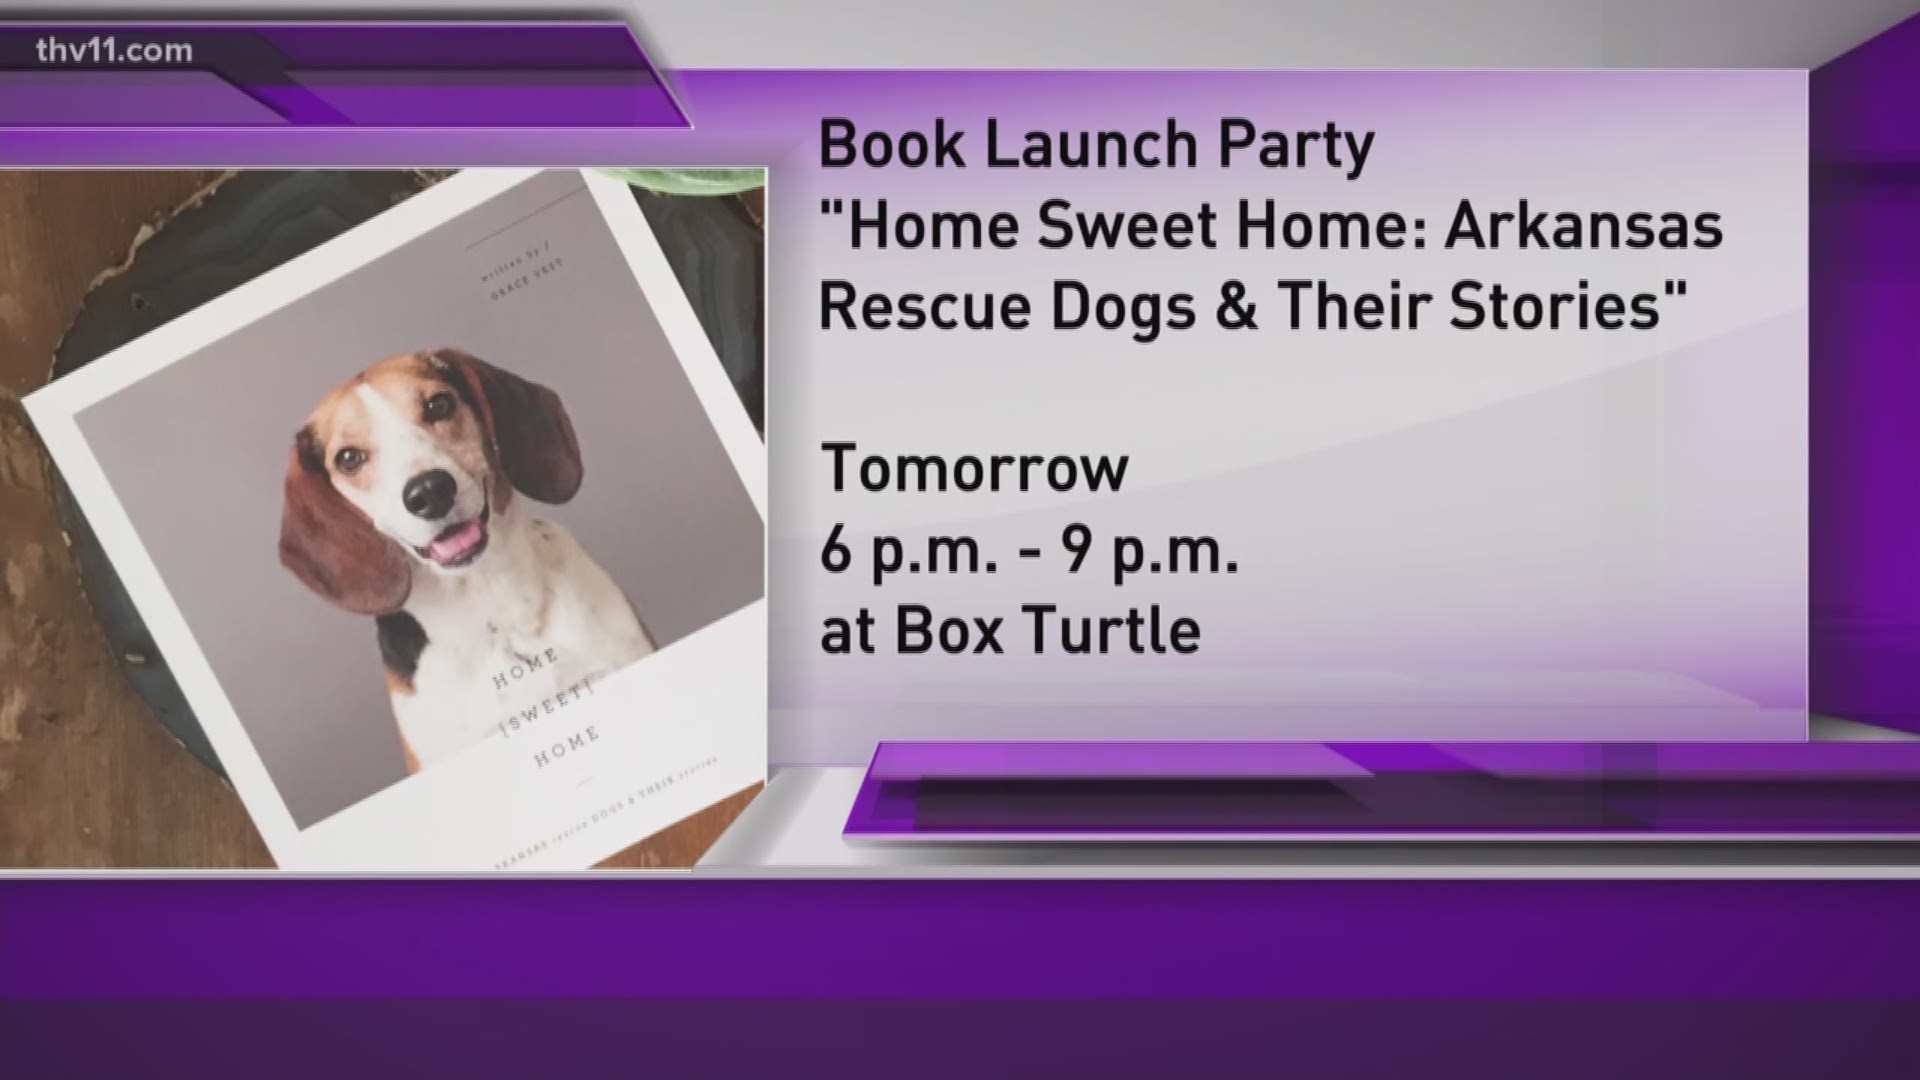 A new book, "Home Sweet Home" shares stories of hope to encourage dog adoption. Author Grace Vest joined THV11 This Morning